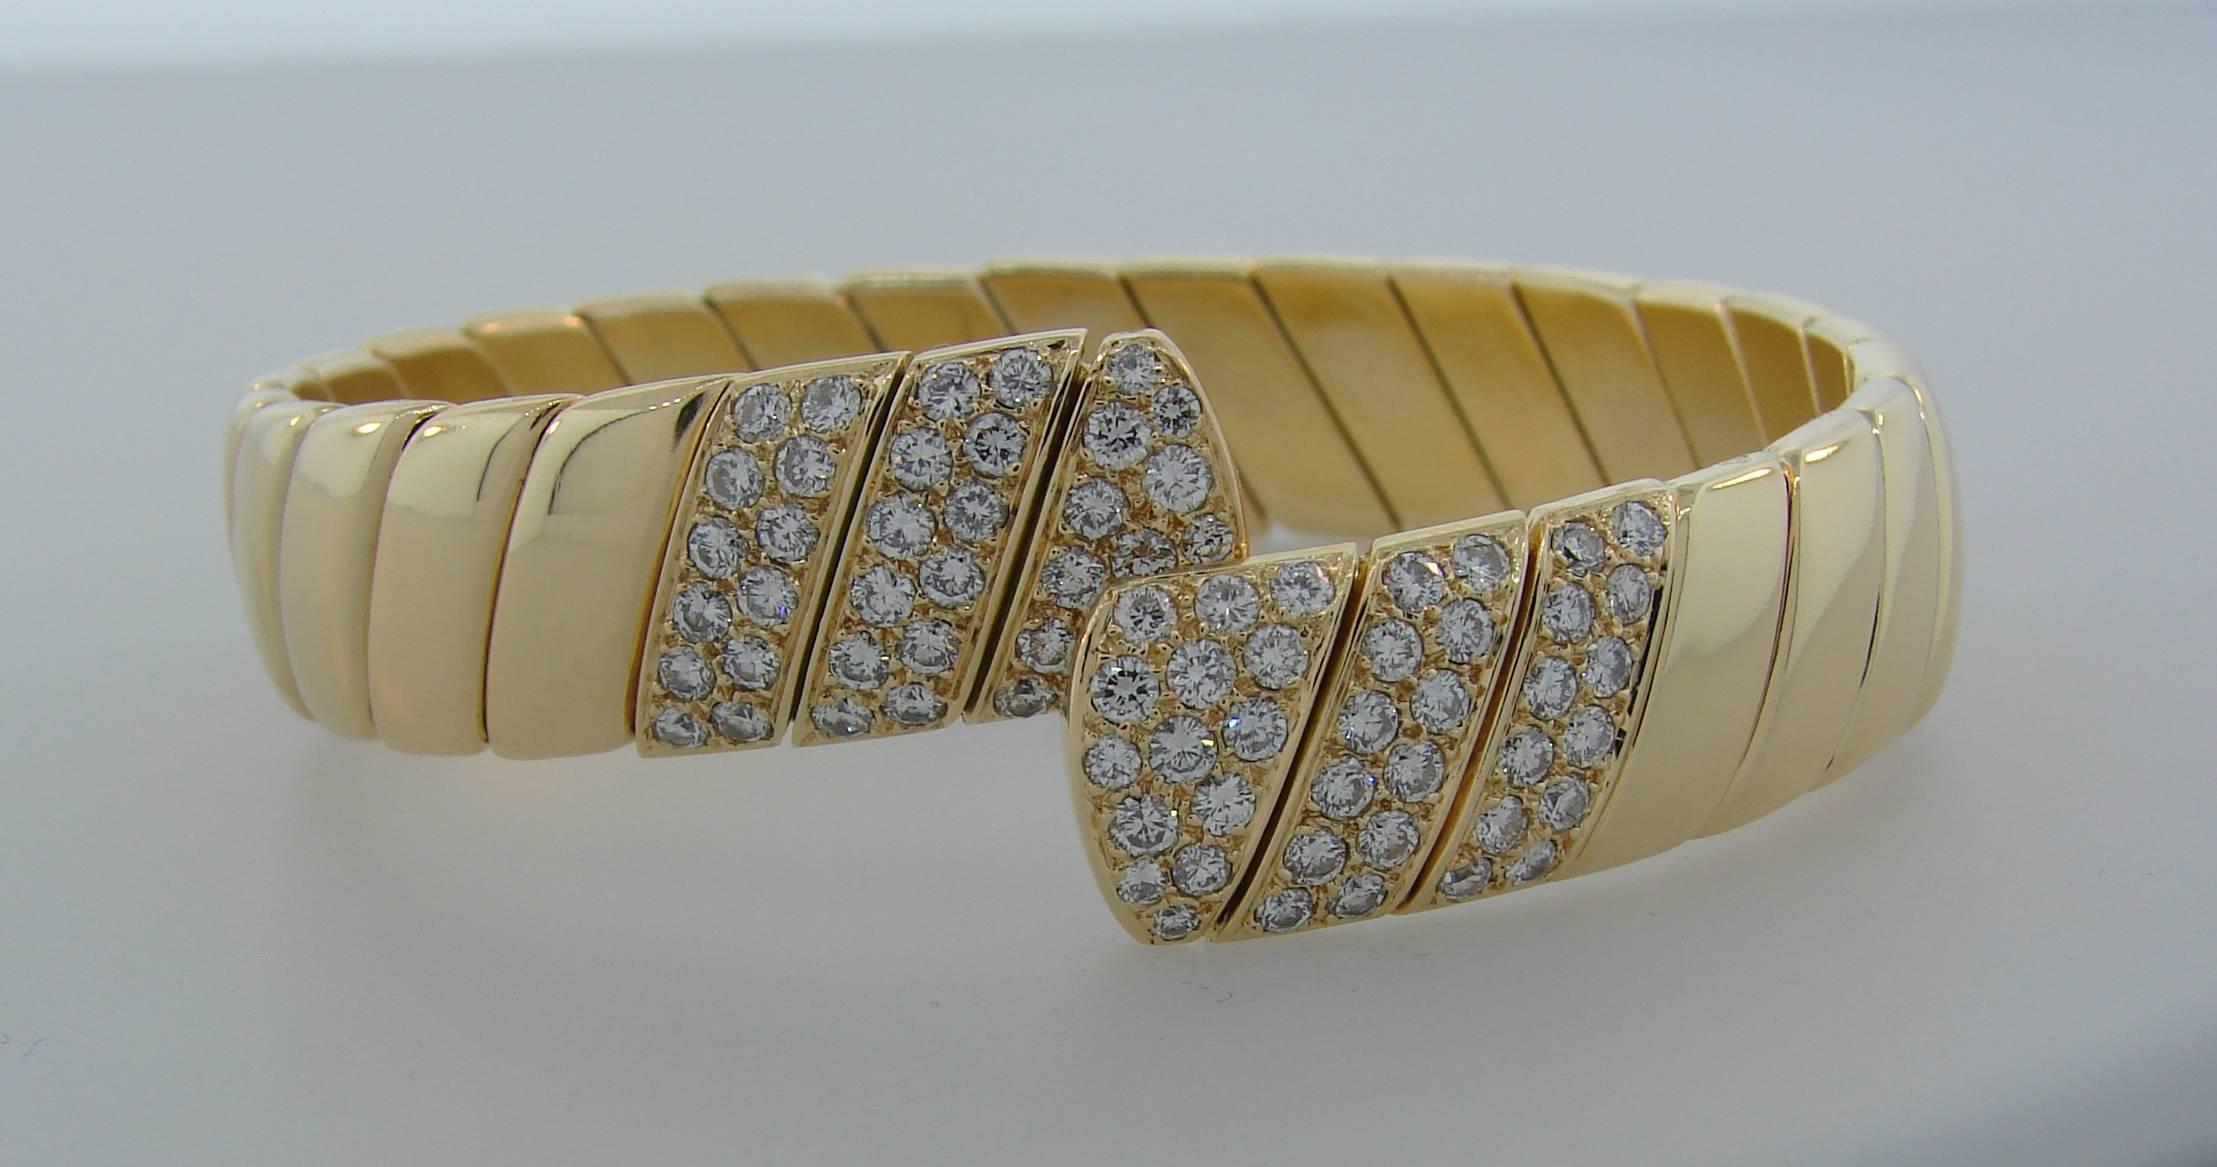 Classy and timeless bracelet created by Cartier in France in 1980s. Elegant and wearable, the bangle is a great addition to your jewelry collection. 
Made of 18 karat yellow gold and set with 1.85 carats of round brilliant cut diamonds (F-G color,